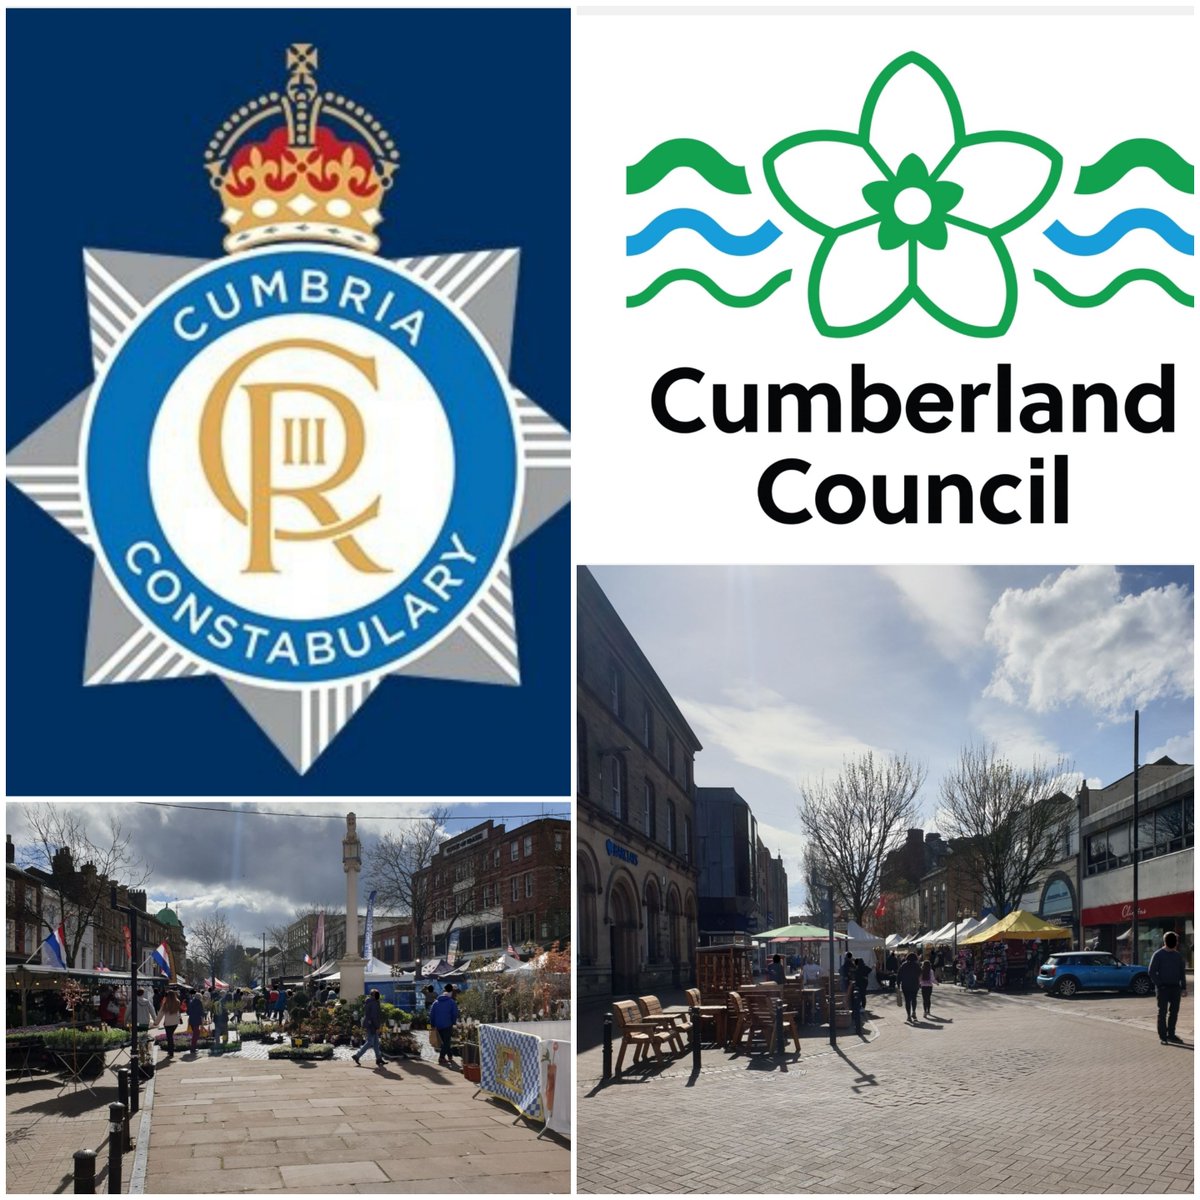 PC 2608 is on foot in Carlisle city centre for the Easter International Market. The market is here from the 28th March to the 1st April come down and enjoy some amazing food in the sun 😎 orlo.uk/27vcq #Cumbriapolice #Cumberlandcouncil #Neighbourhoodpolicing